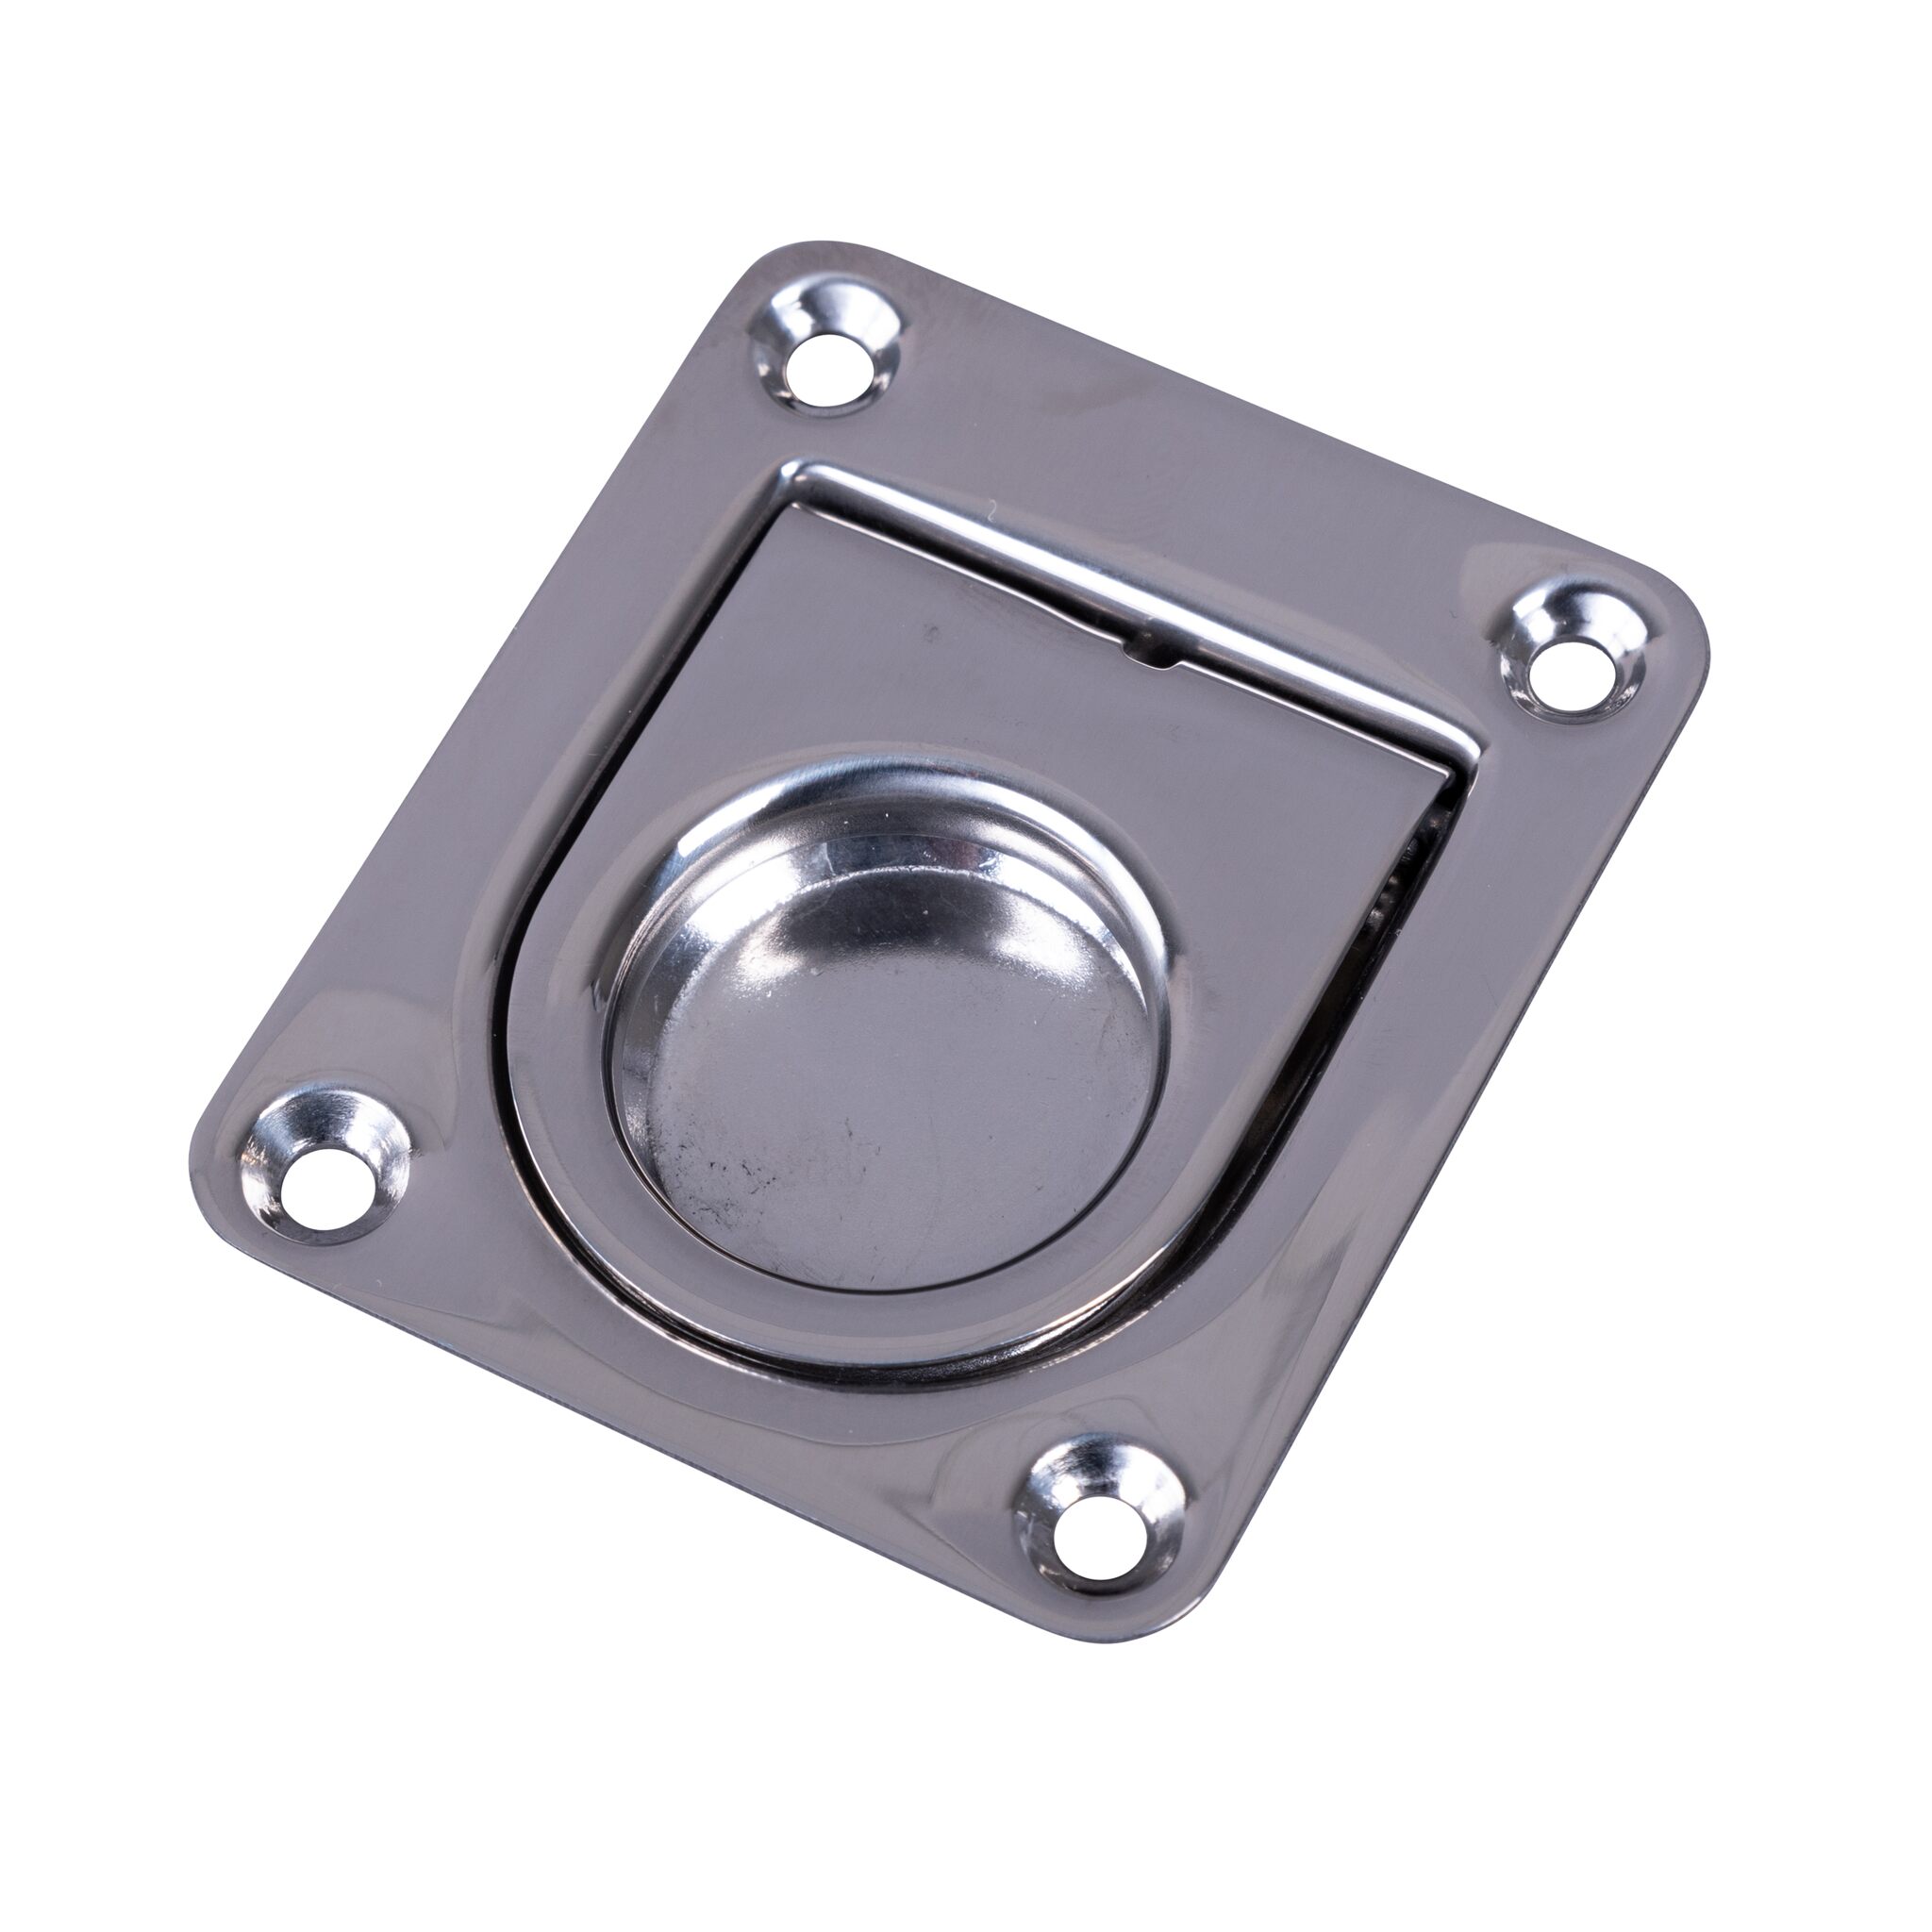 Stainless steel inlet handle